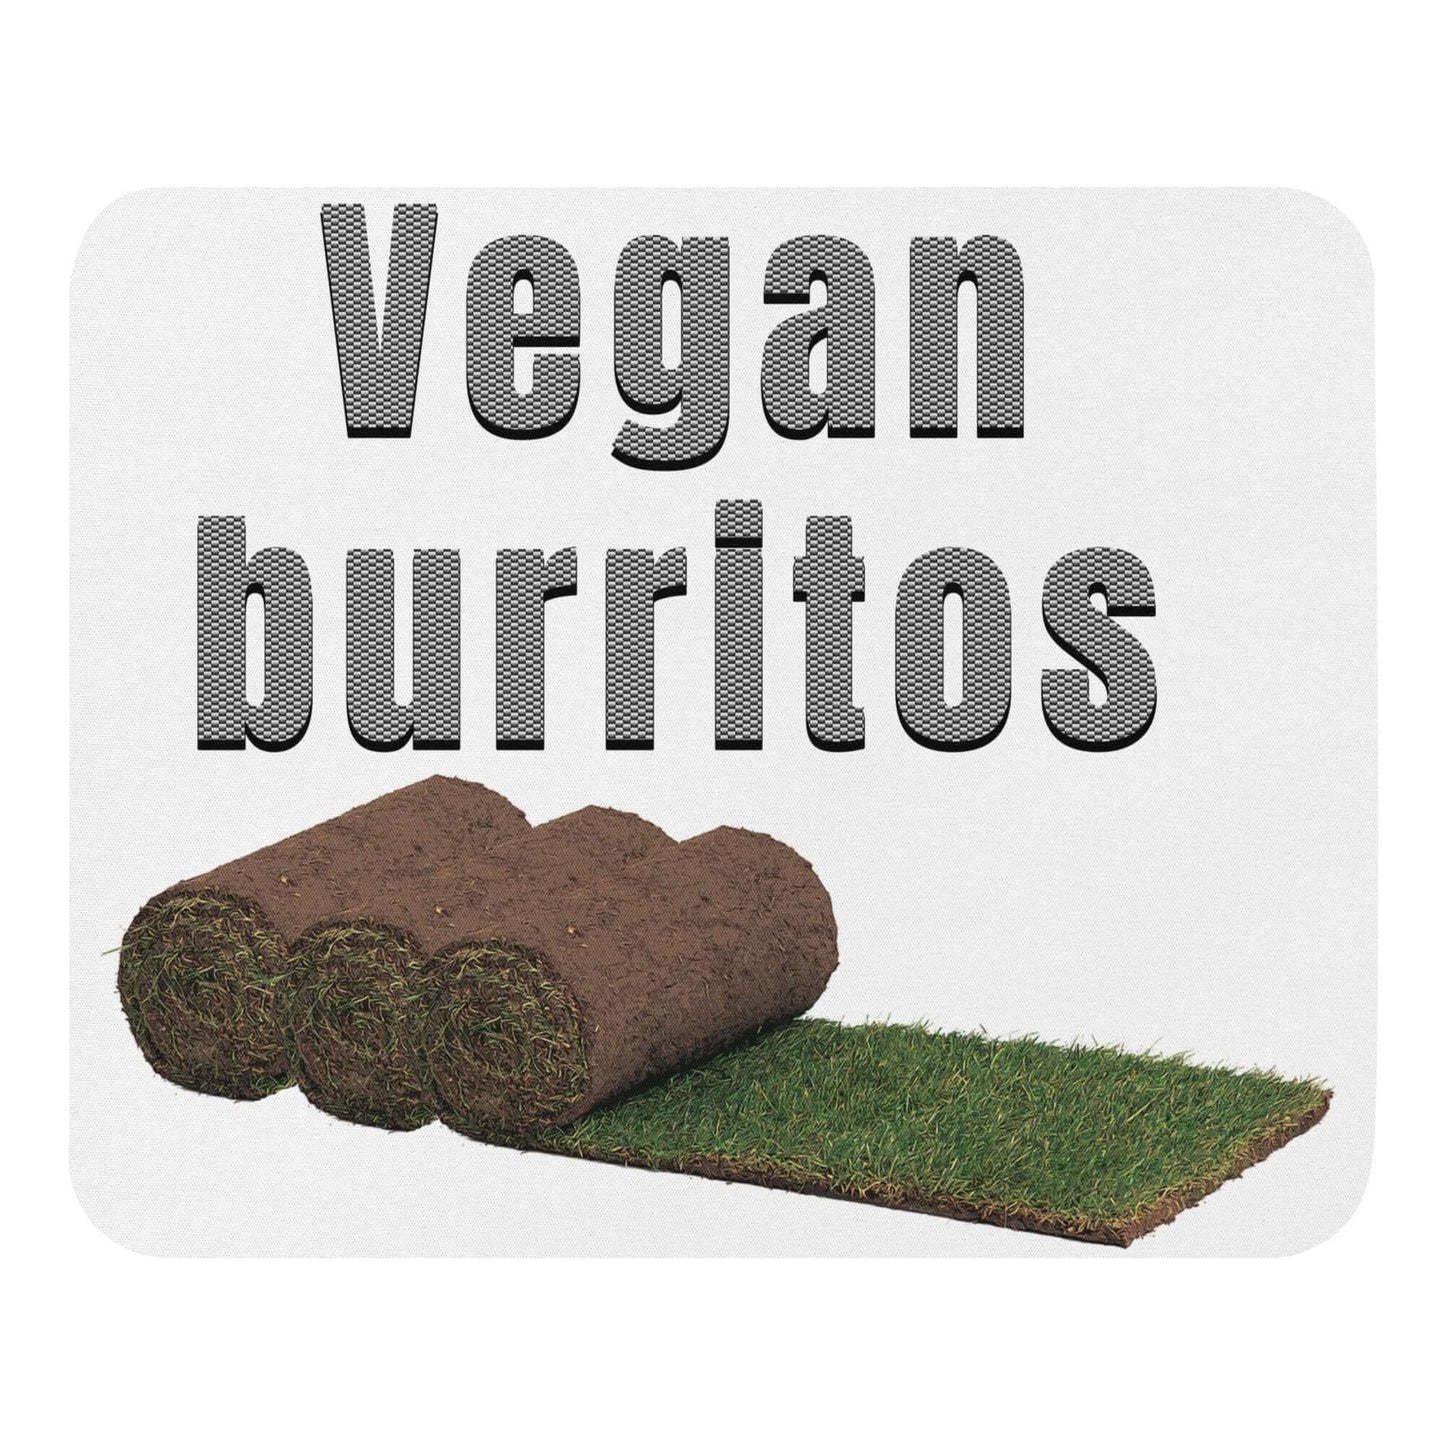 Vegan Burritos - Mouse pad Ancestral Diet Atkins Diet Baconator Barbecue Butchery carnivore Carnivorous Diet Coffee Snob Fishing Free-Range Meat Funny Quotes Game Meat Grass-Fed Meat Grilling High-Fat Diet Humor Hunting keto Ketogenic Low-Carb Diet meat Omnivore Paleo Predator. Meat Eater Protein Protein Shake Red Meat sod Steakhouse vegan White Meat Wordplay